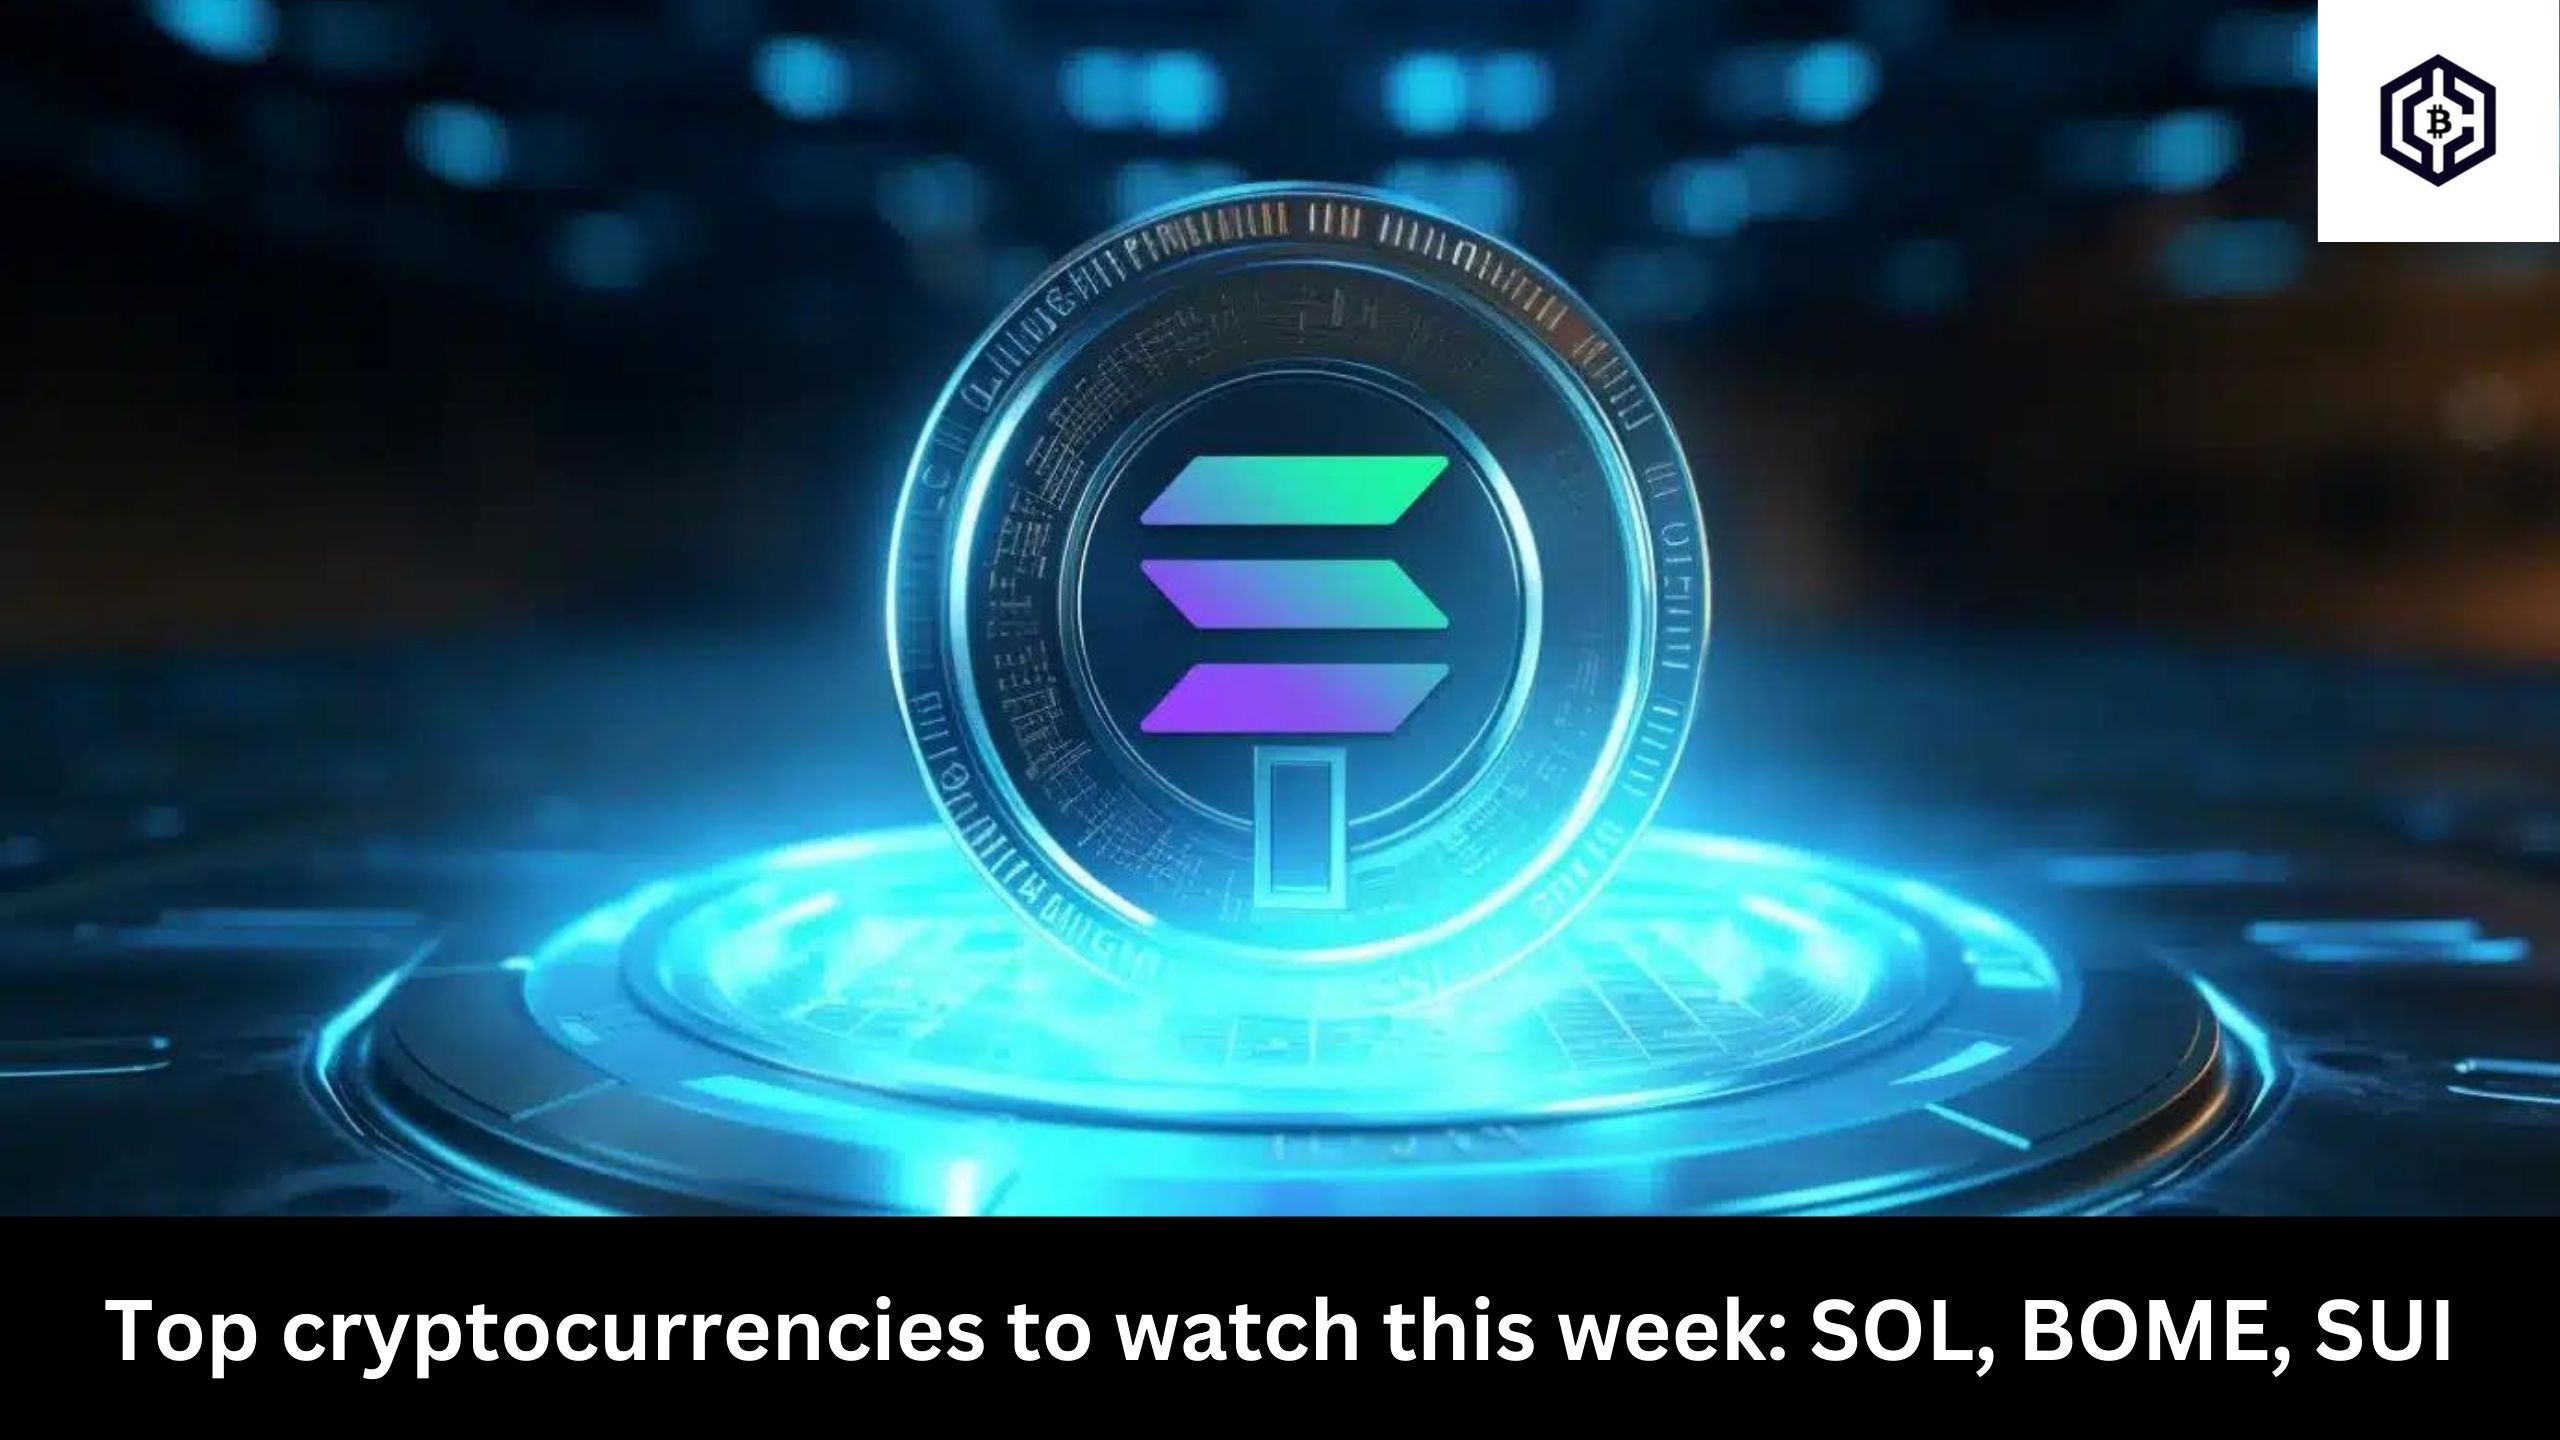 Top cryptocurrencies to watch this week SOL, BOME, SUI